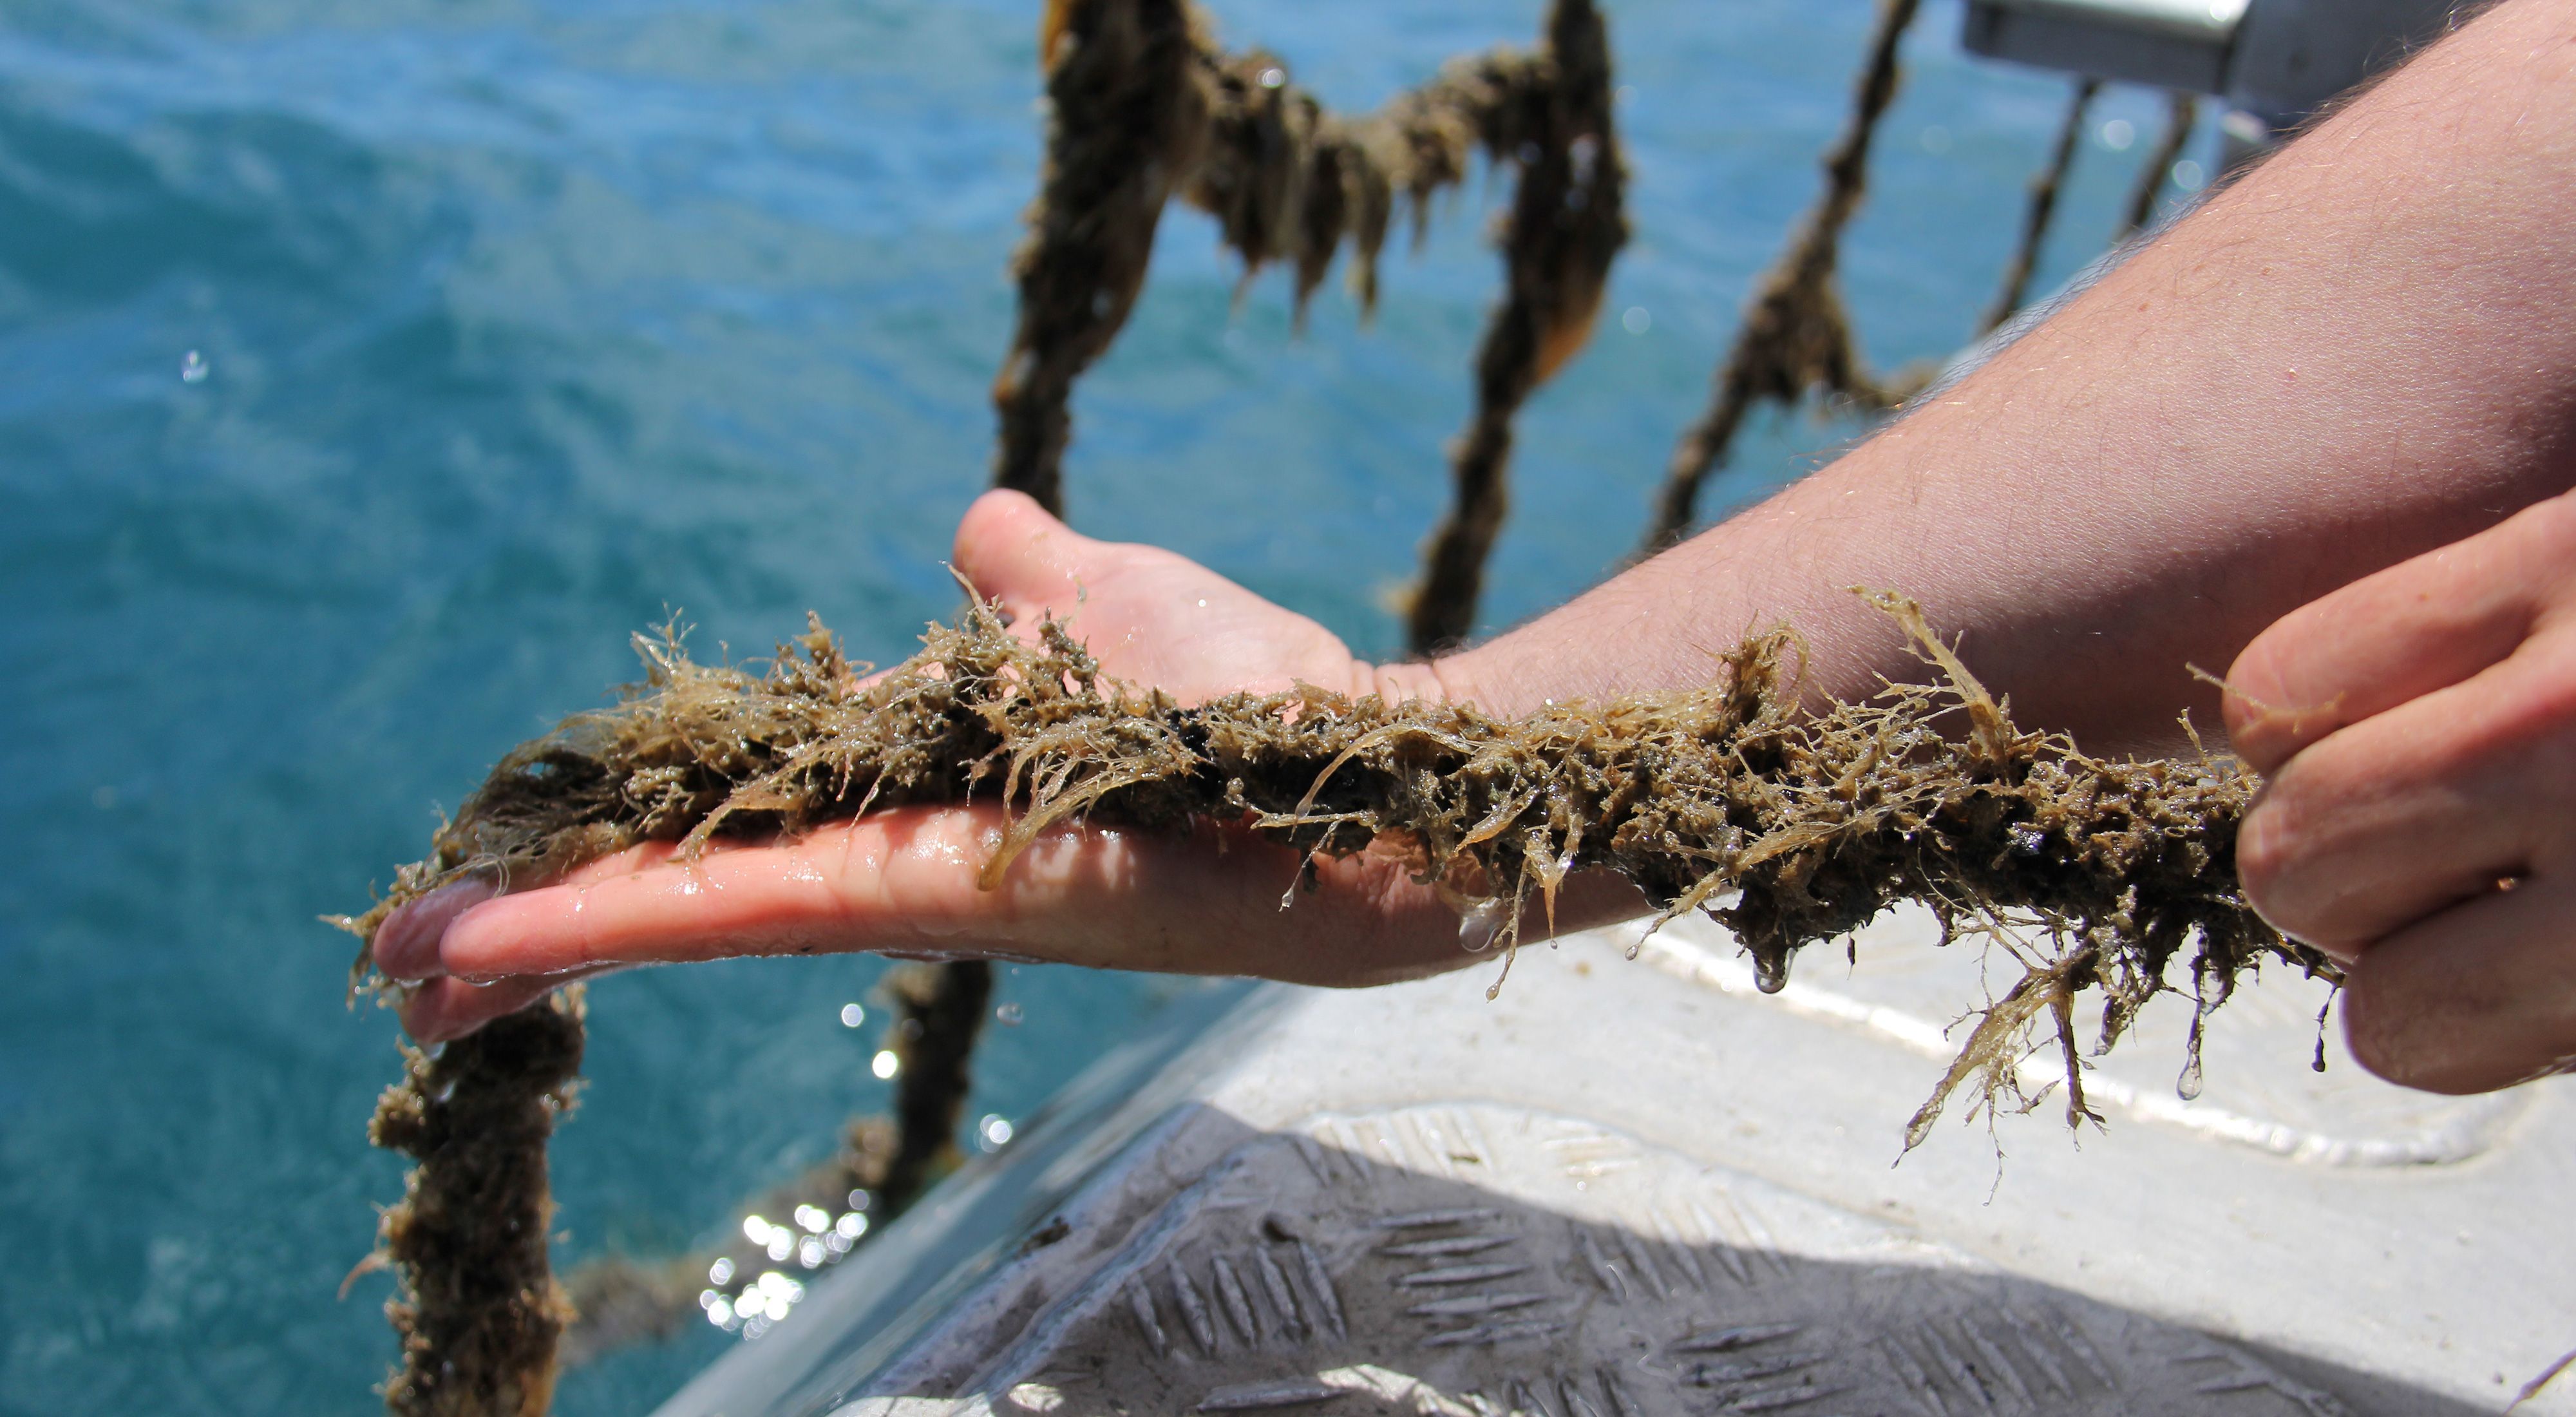 That have been growing on long ropes at a shellfish aquaculture farm